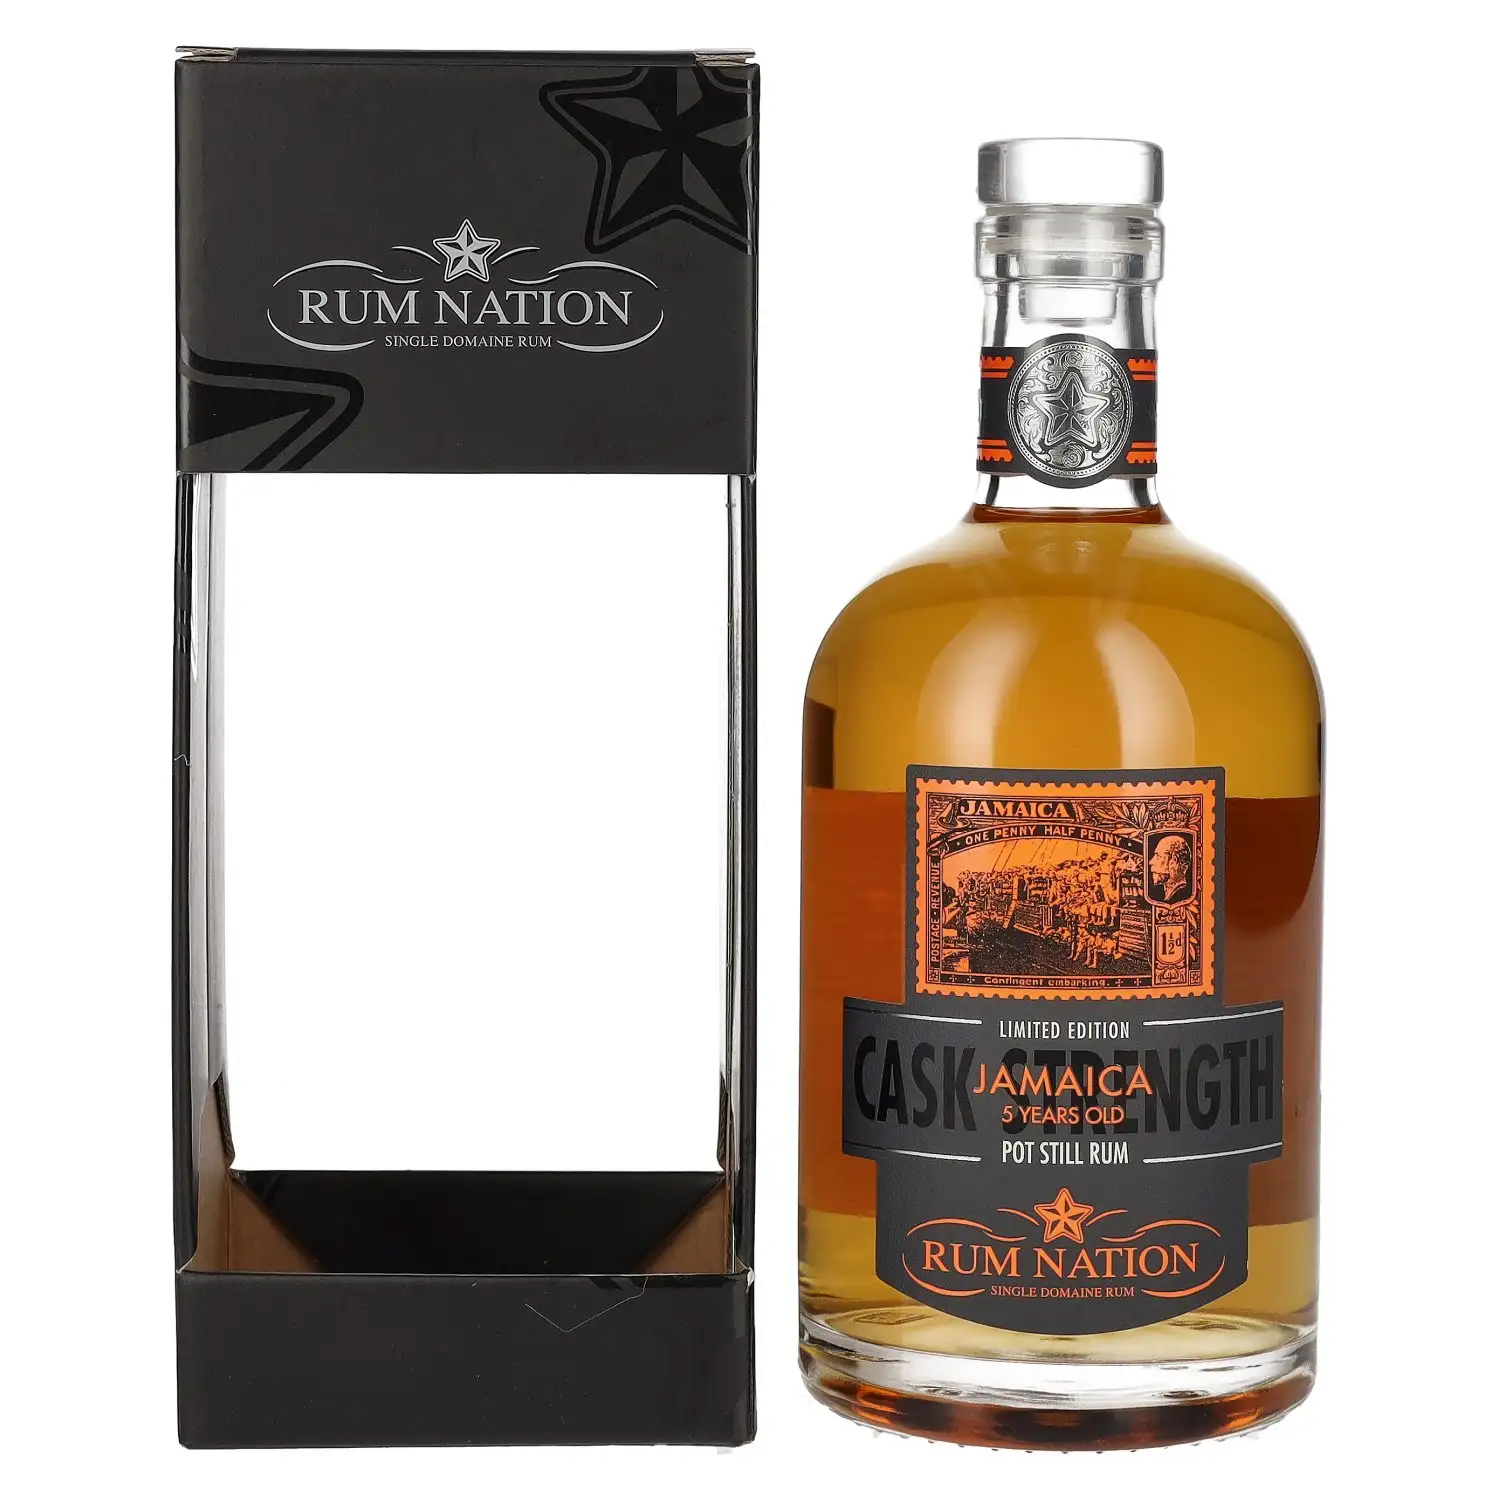 Image of the front of the bottle of the rum Jamaica 5 Years (Pot Still Rum)